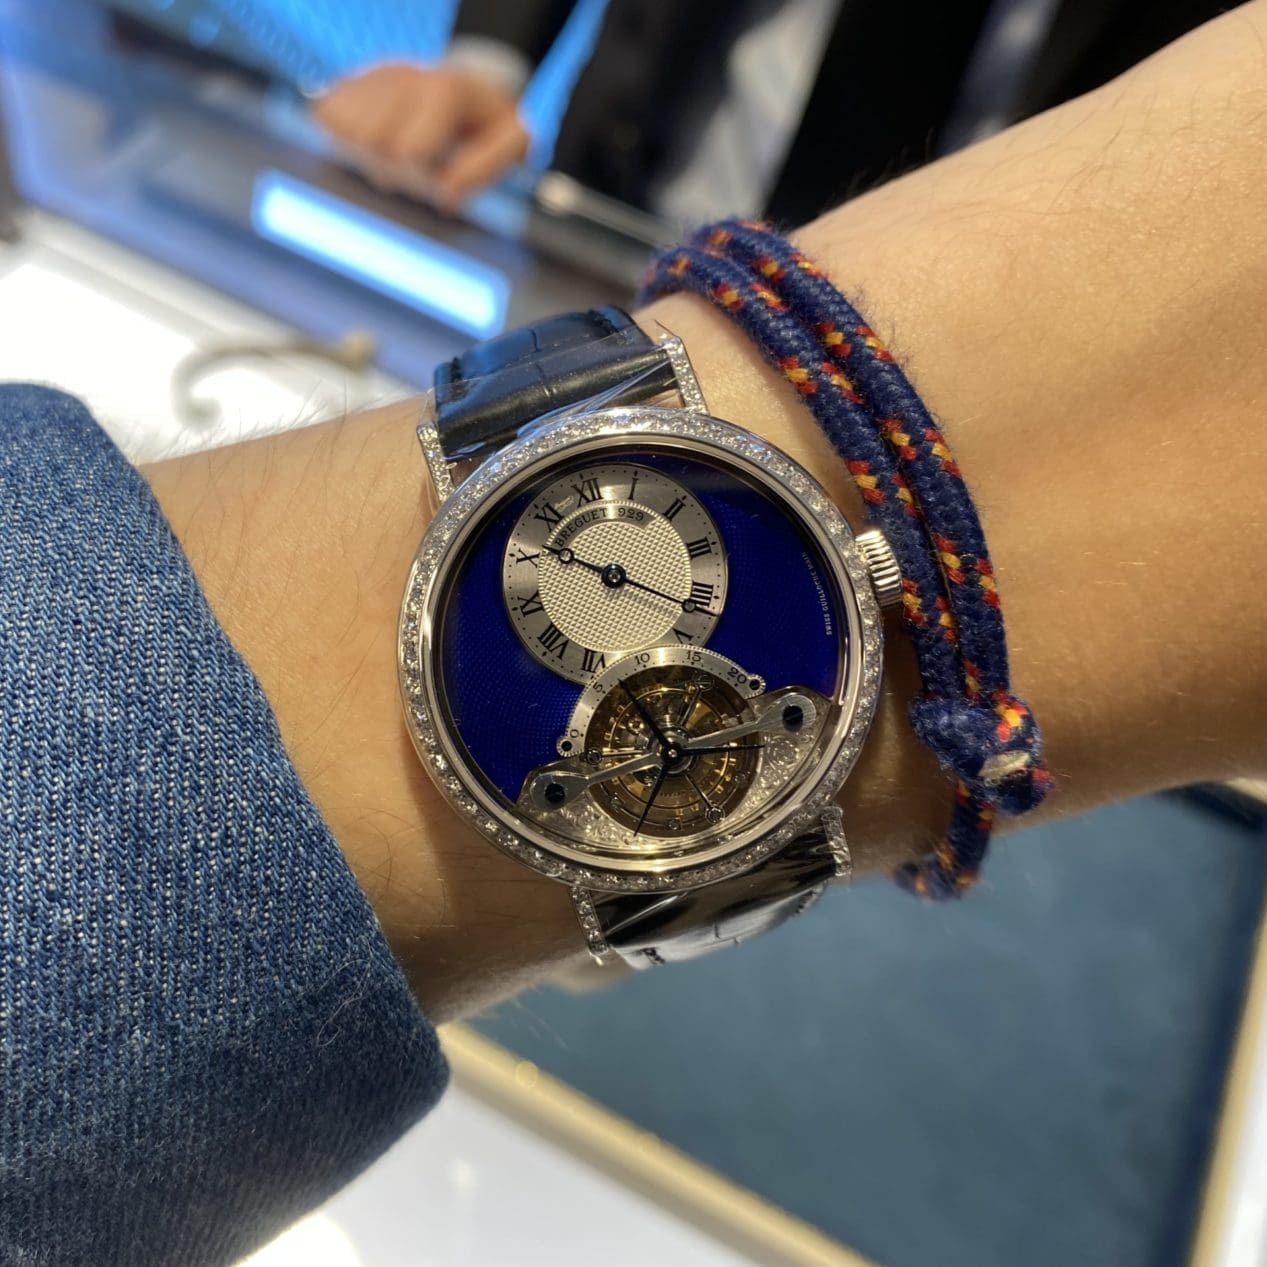 FRIDAY WIND DOWN: An exhibition of Breguet masterpieces